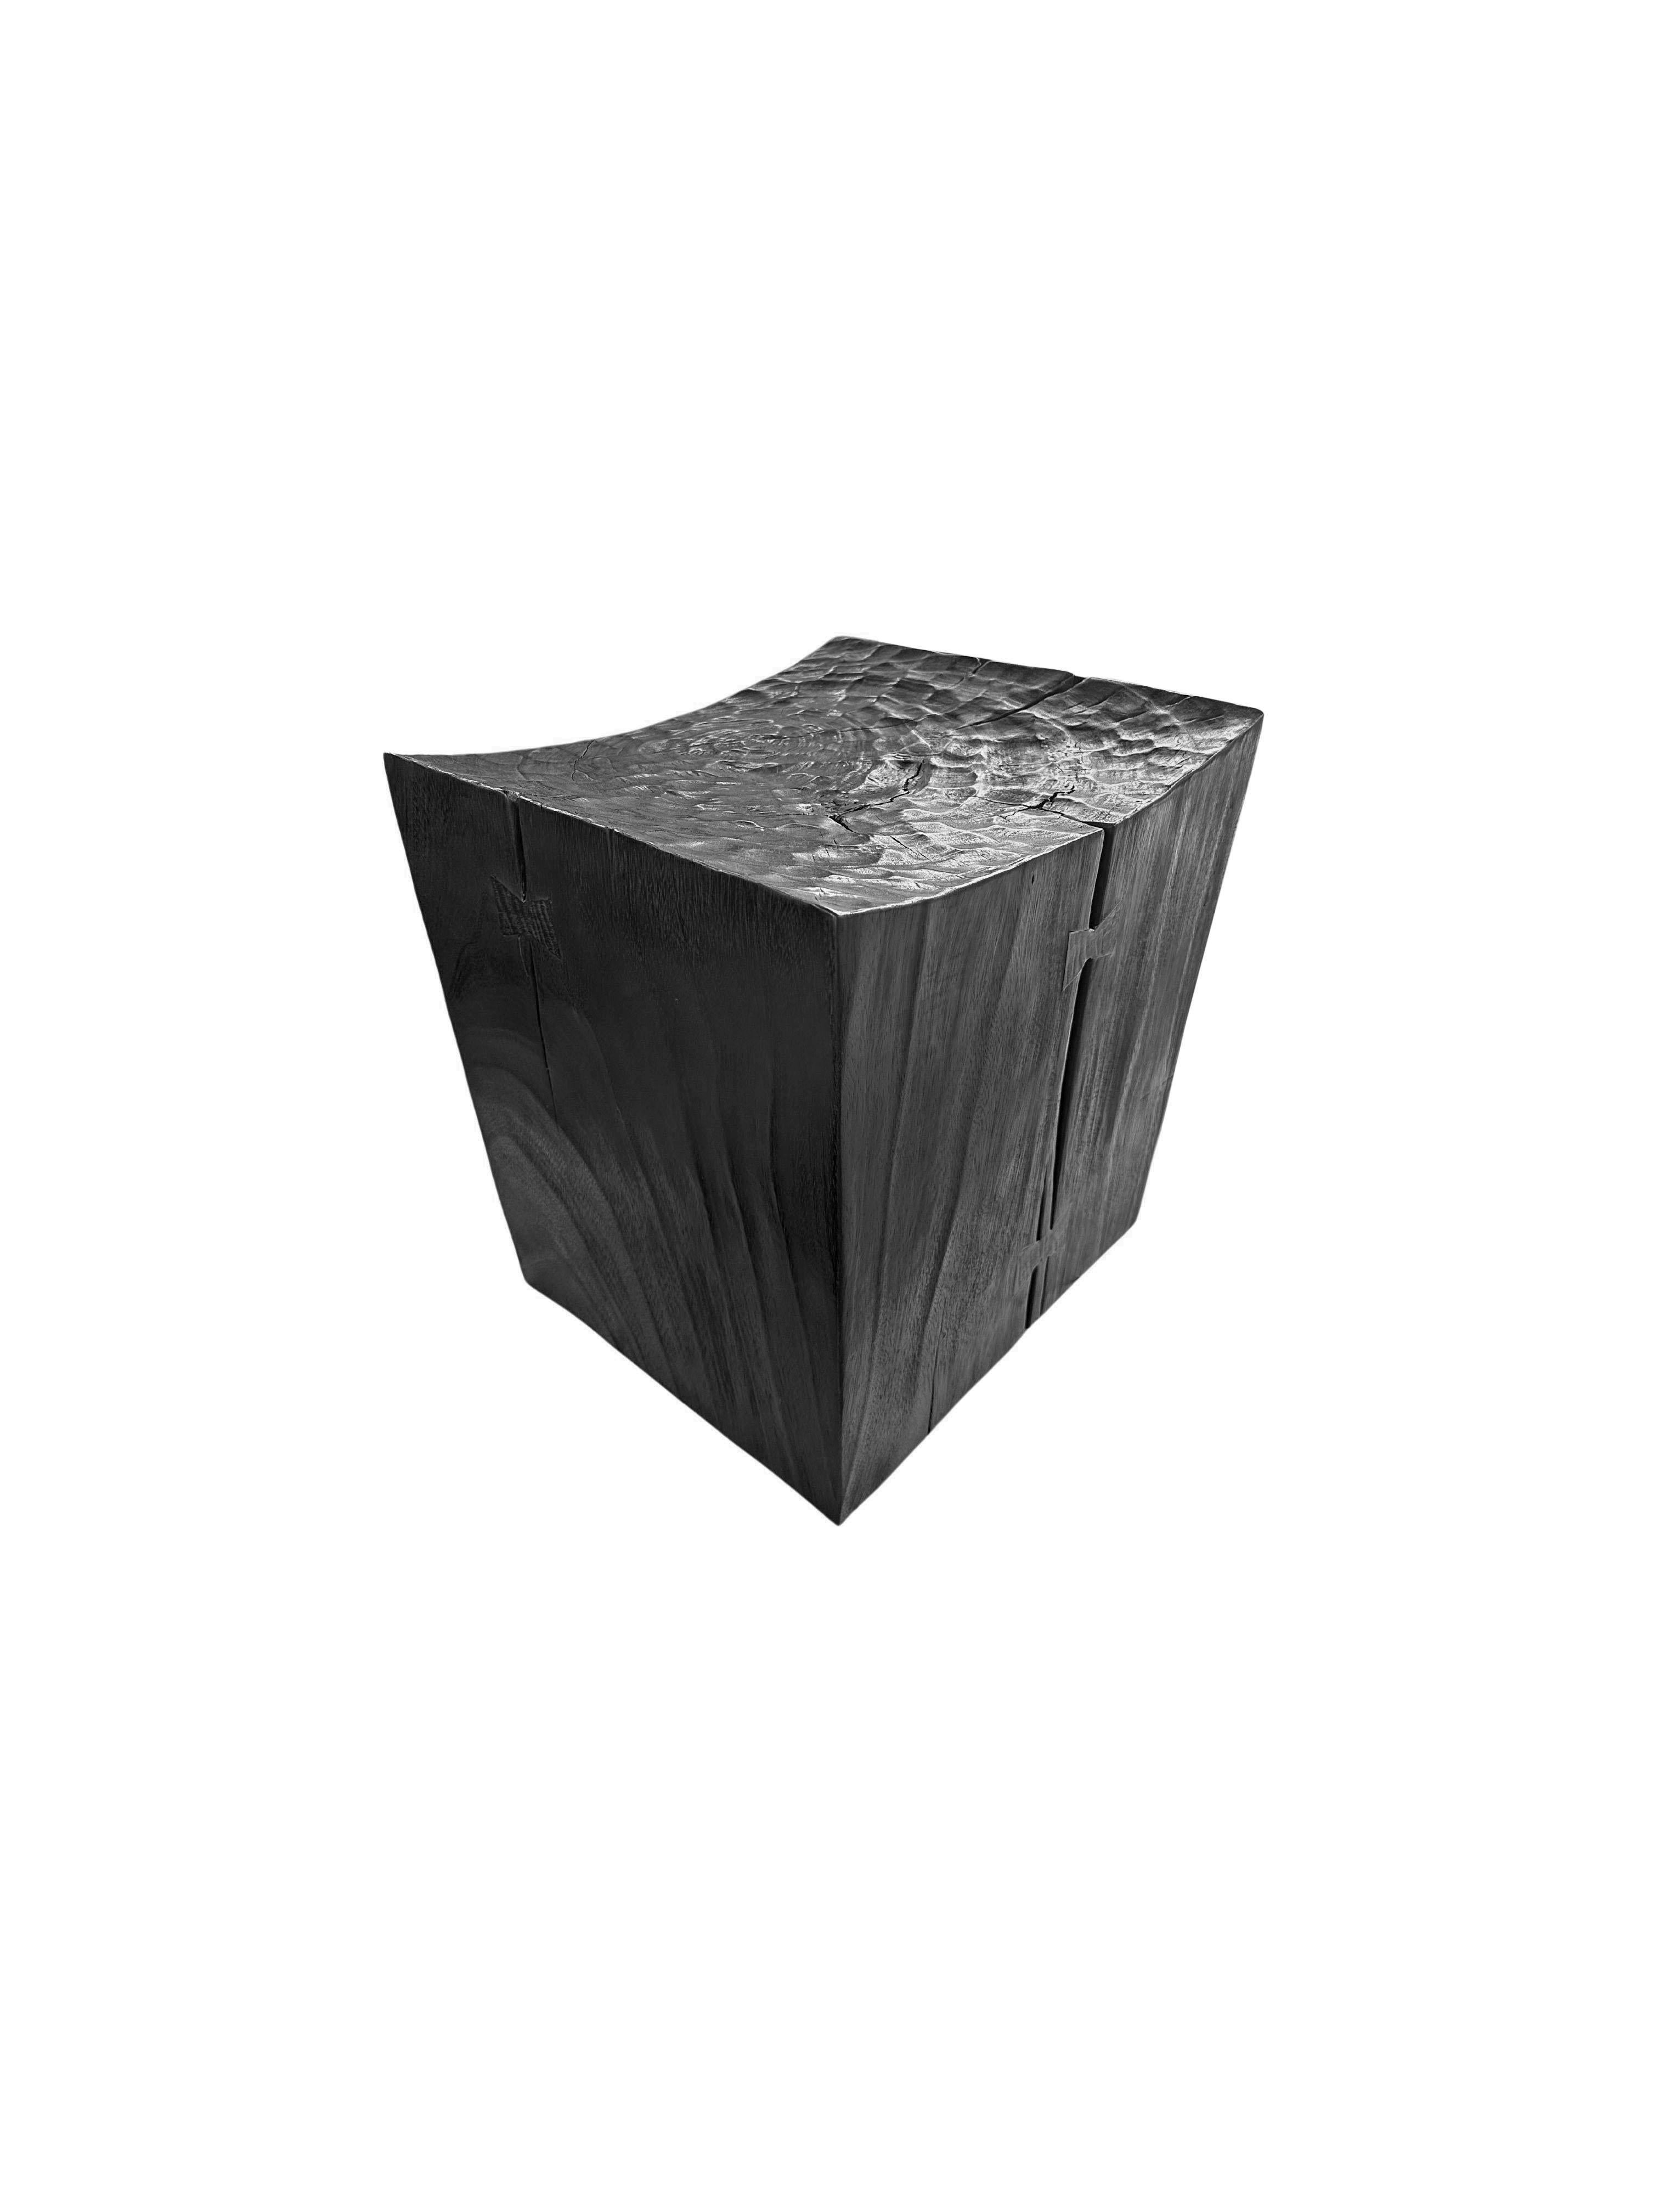 Indonesian Sculptural Stool Carved from Solid Mango Wood Modern Organic, Burnt Finish For Sale